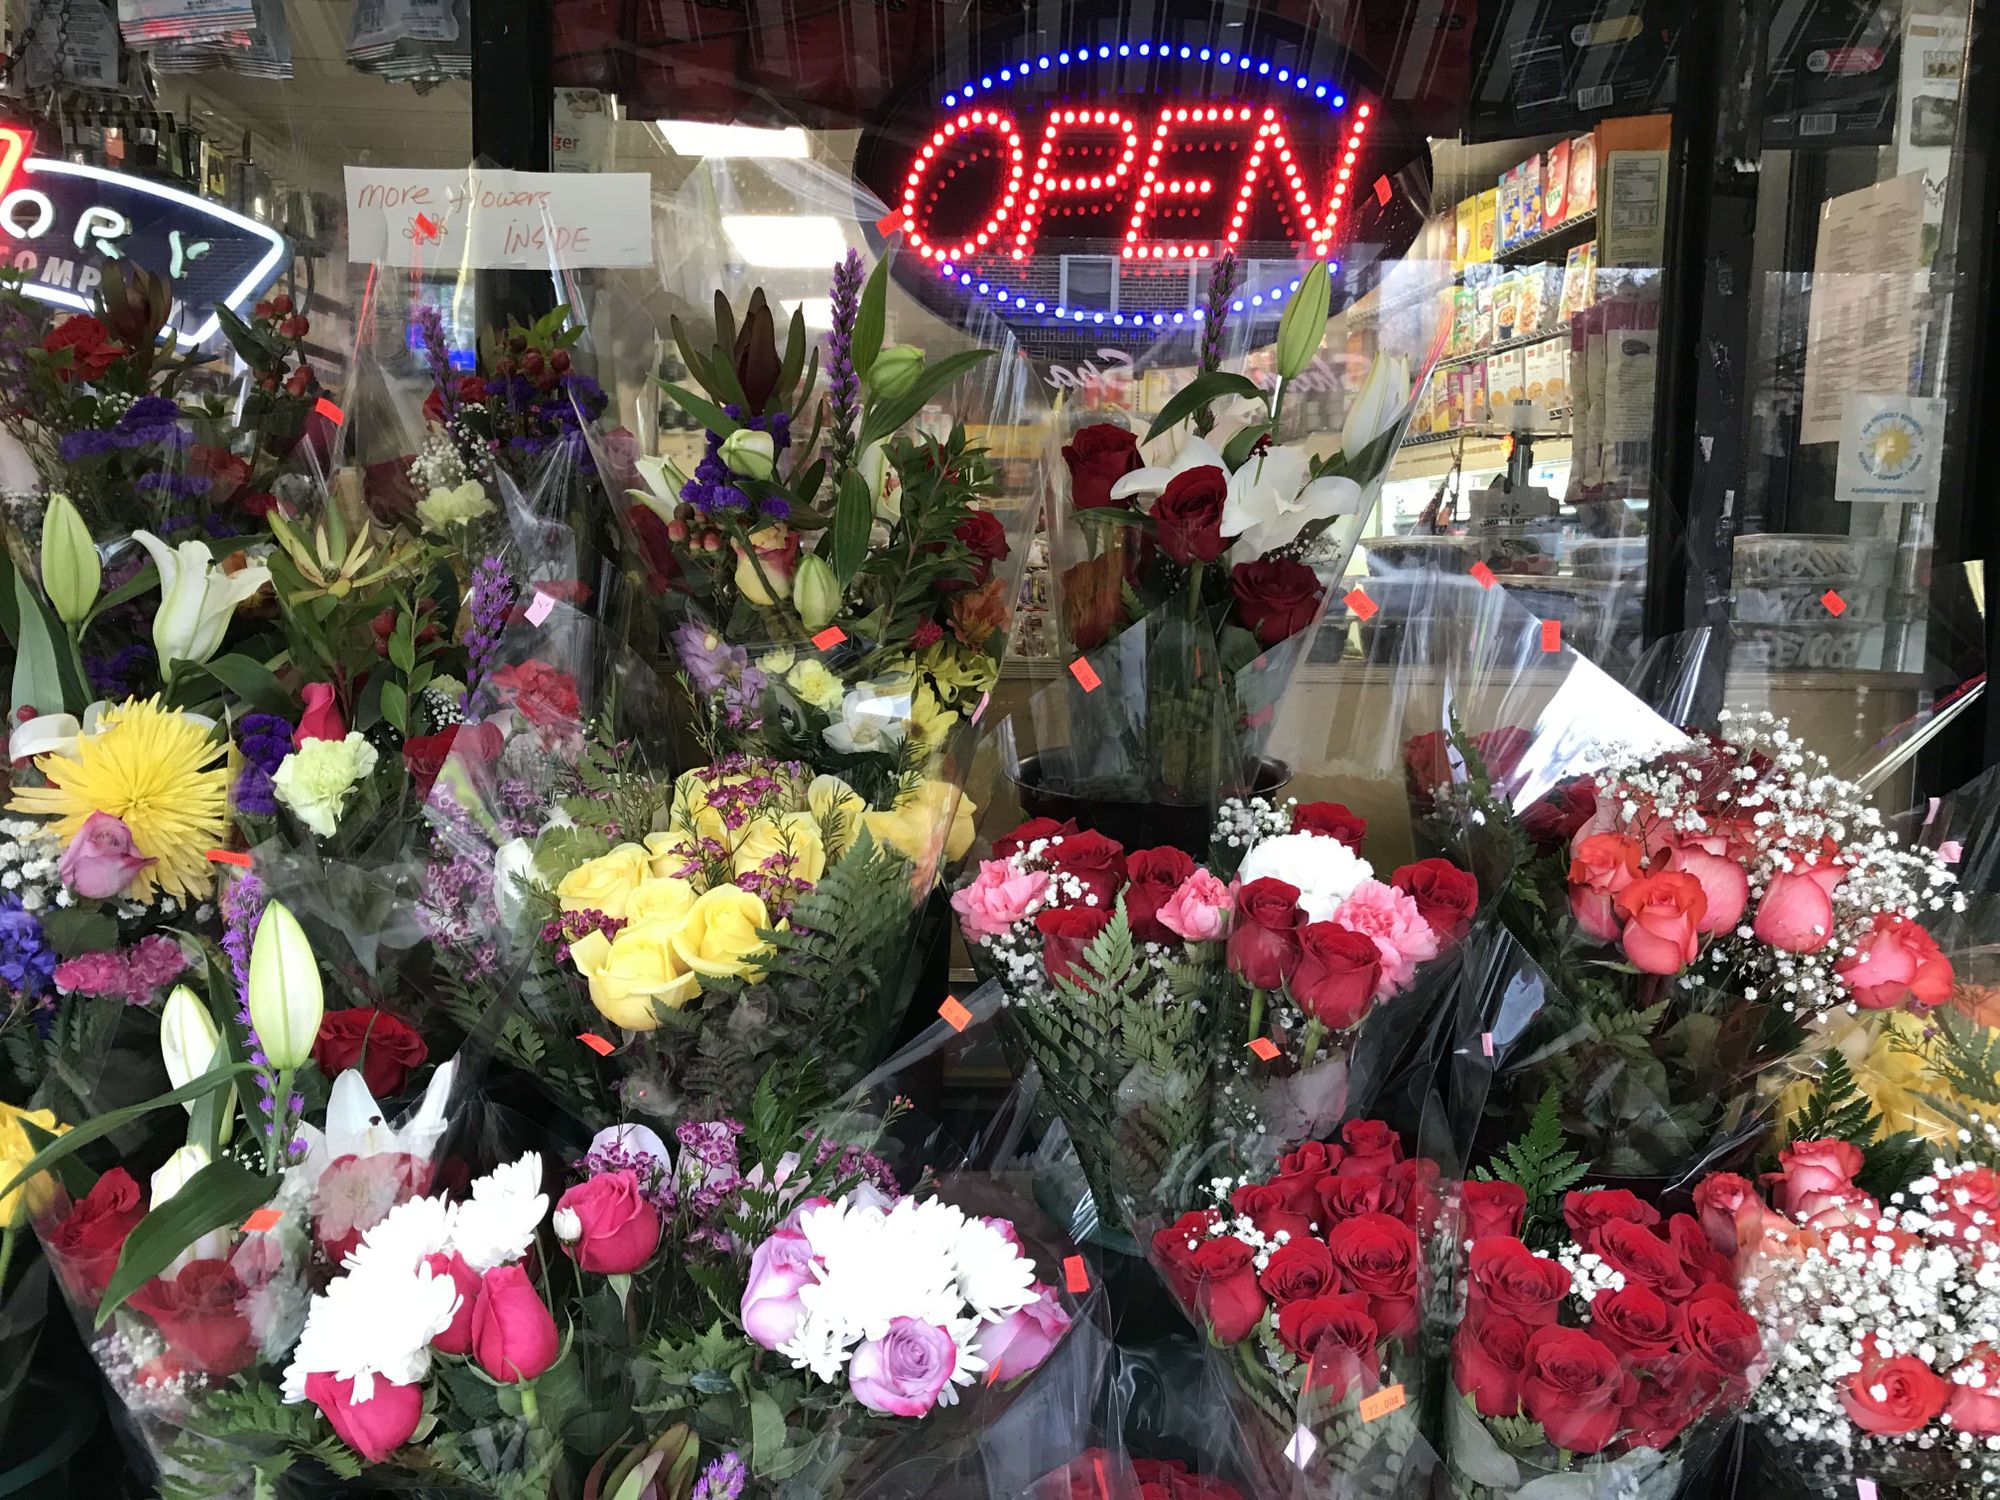 Where To Buy Valentine’s Day Flowers In & Around Park Slope